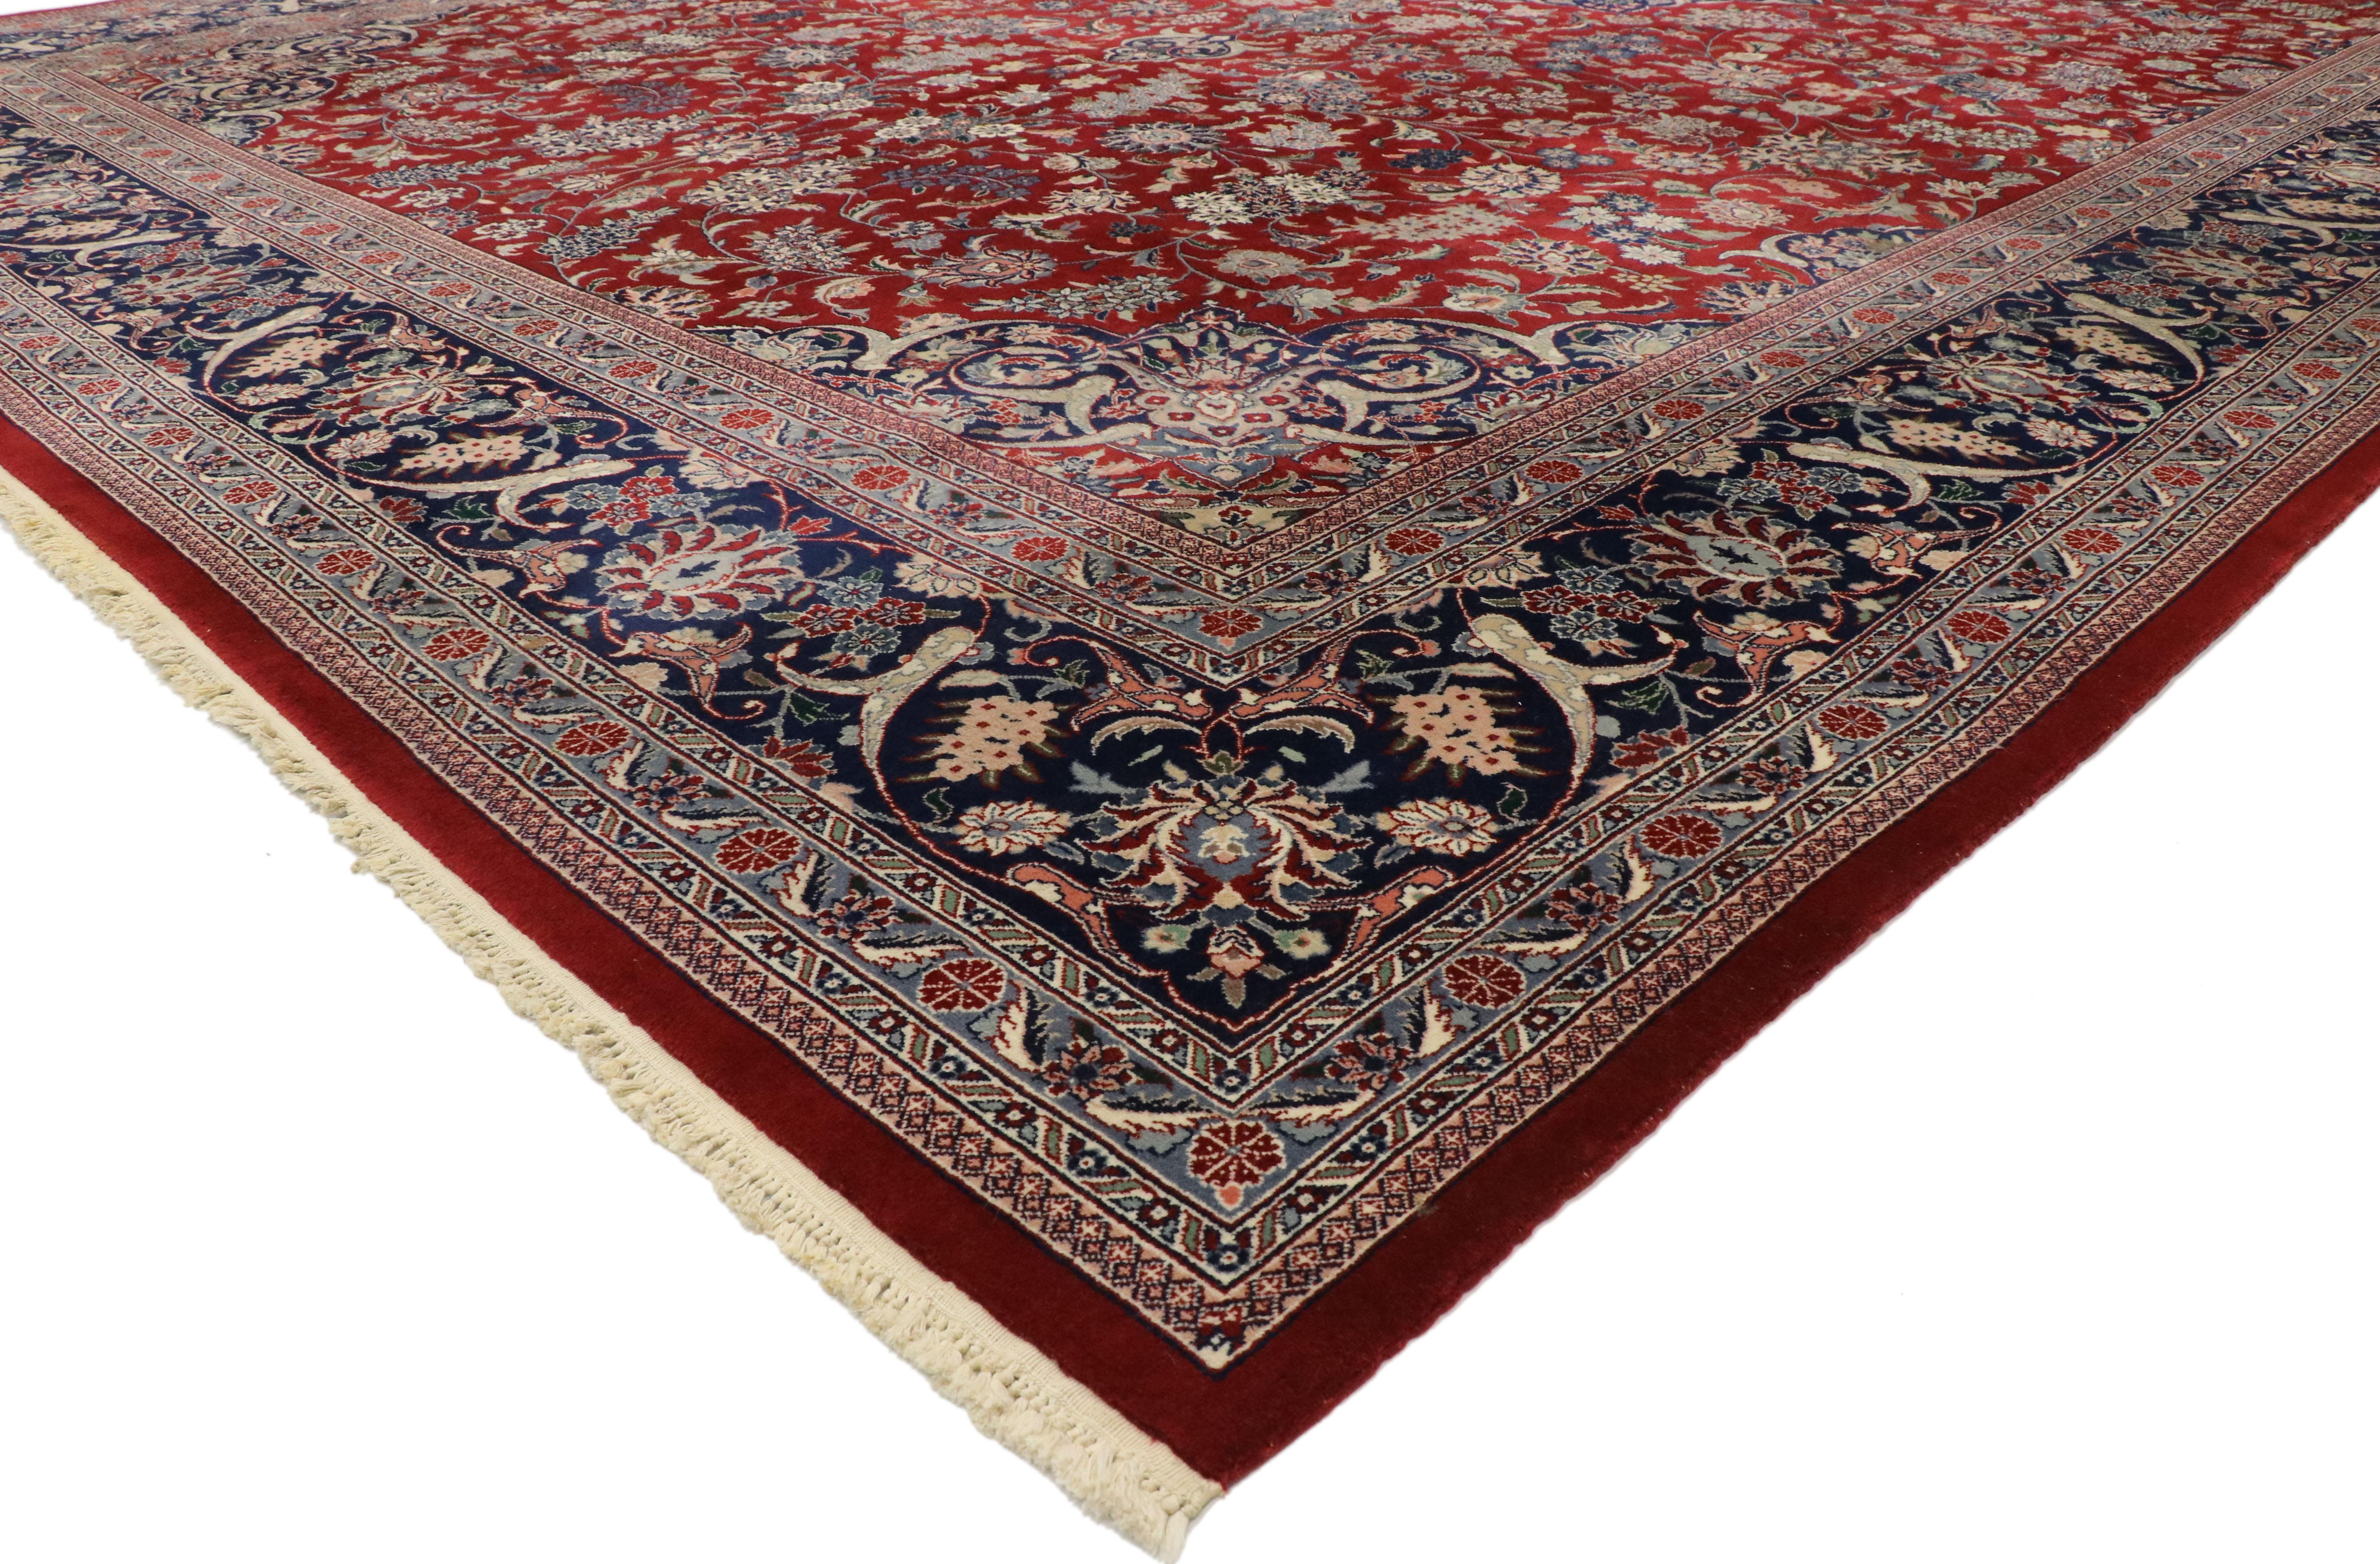 77415, vintage Persian Tabriz Palace rug with Jacobean Elizabethan style 11'11 x 17'11. With timeless appeal, ornate decorative detailing, and effortless beauty, this hand knotted wool vintage Persian Tabriz palace rug is poised to impress. Taking